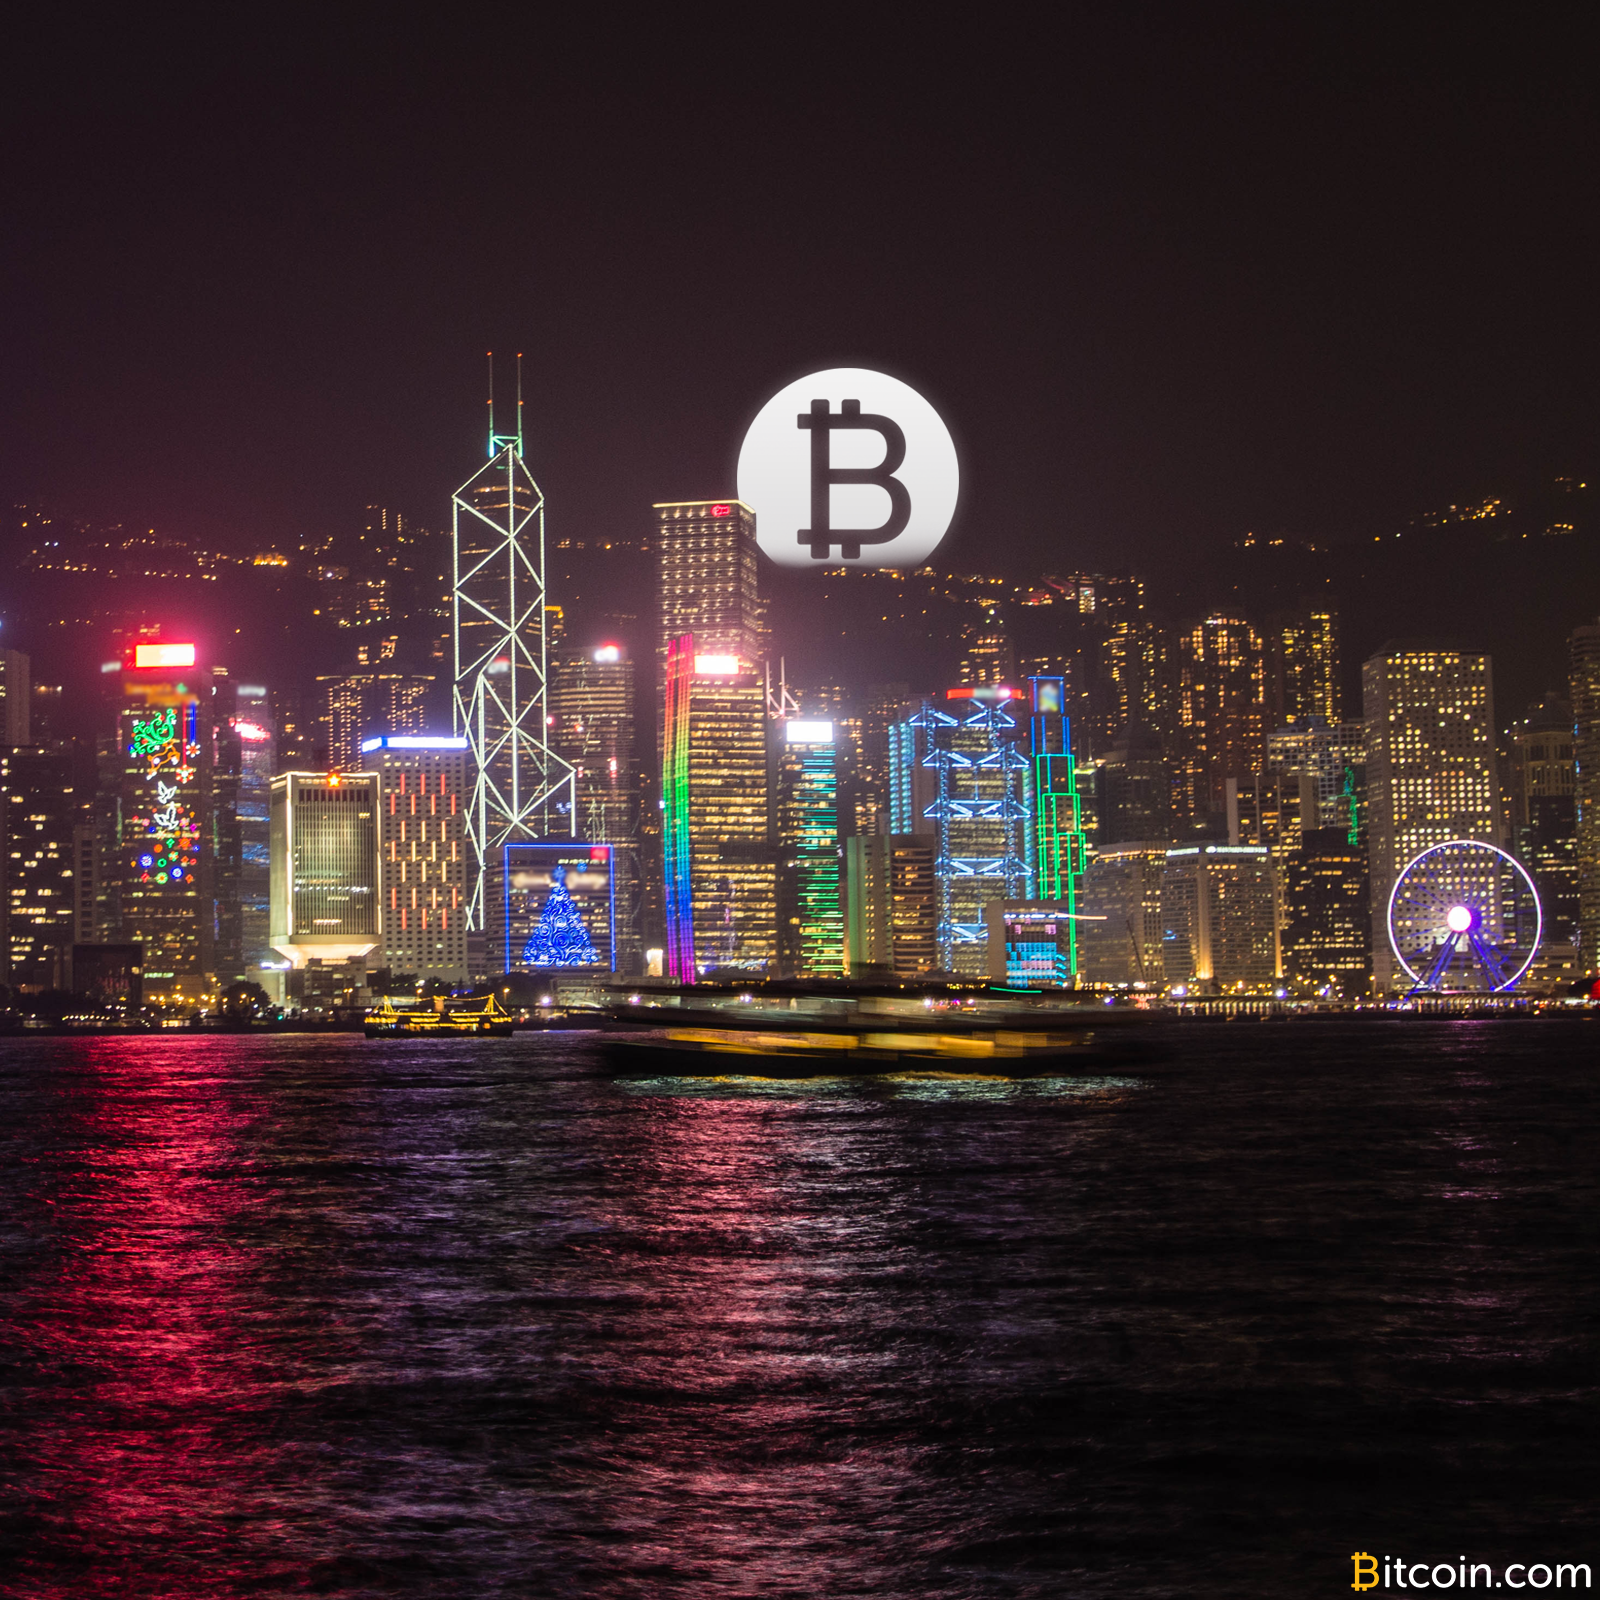 Here's The Trading Center In HK Where They Mined Most of the Bitcoin Cash Blocks